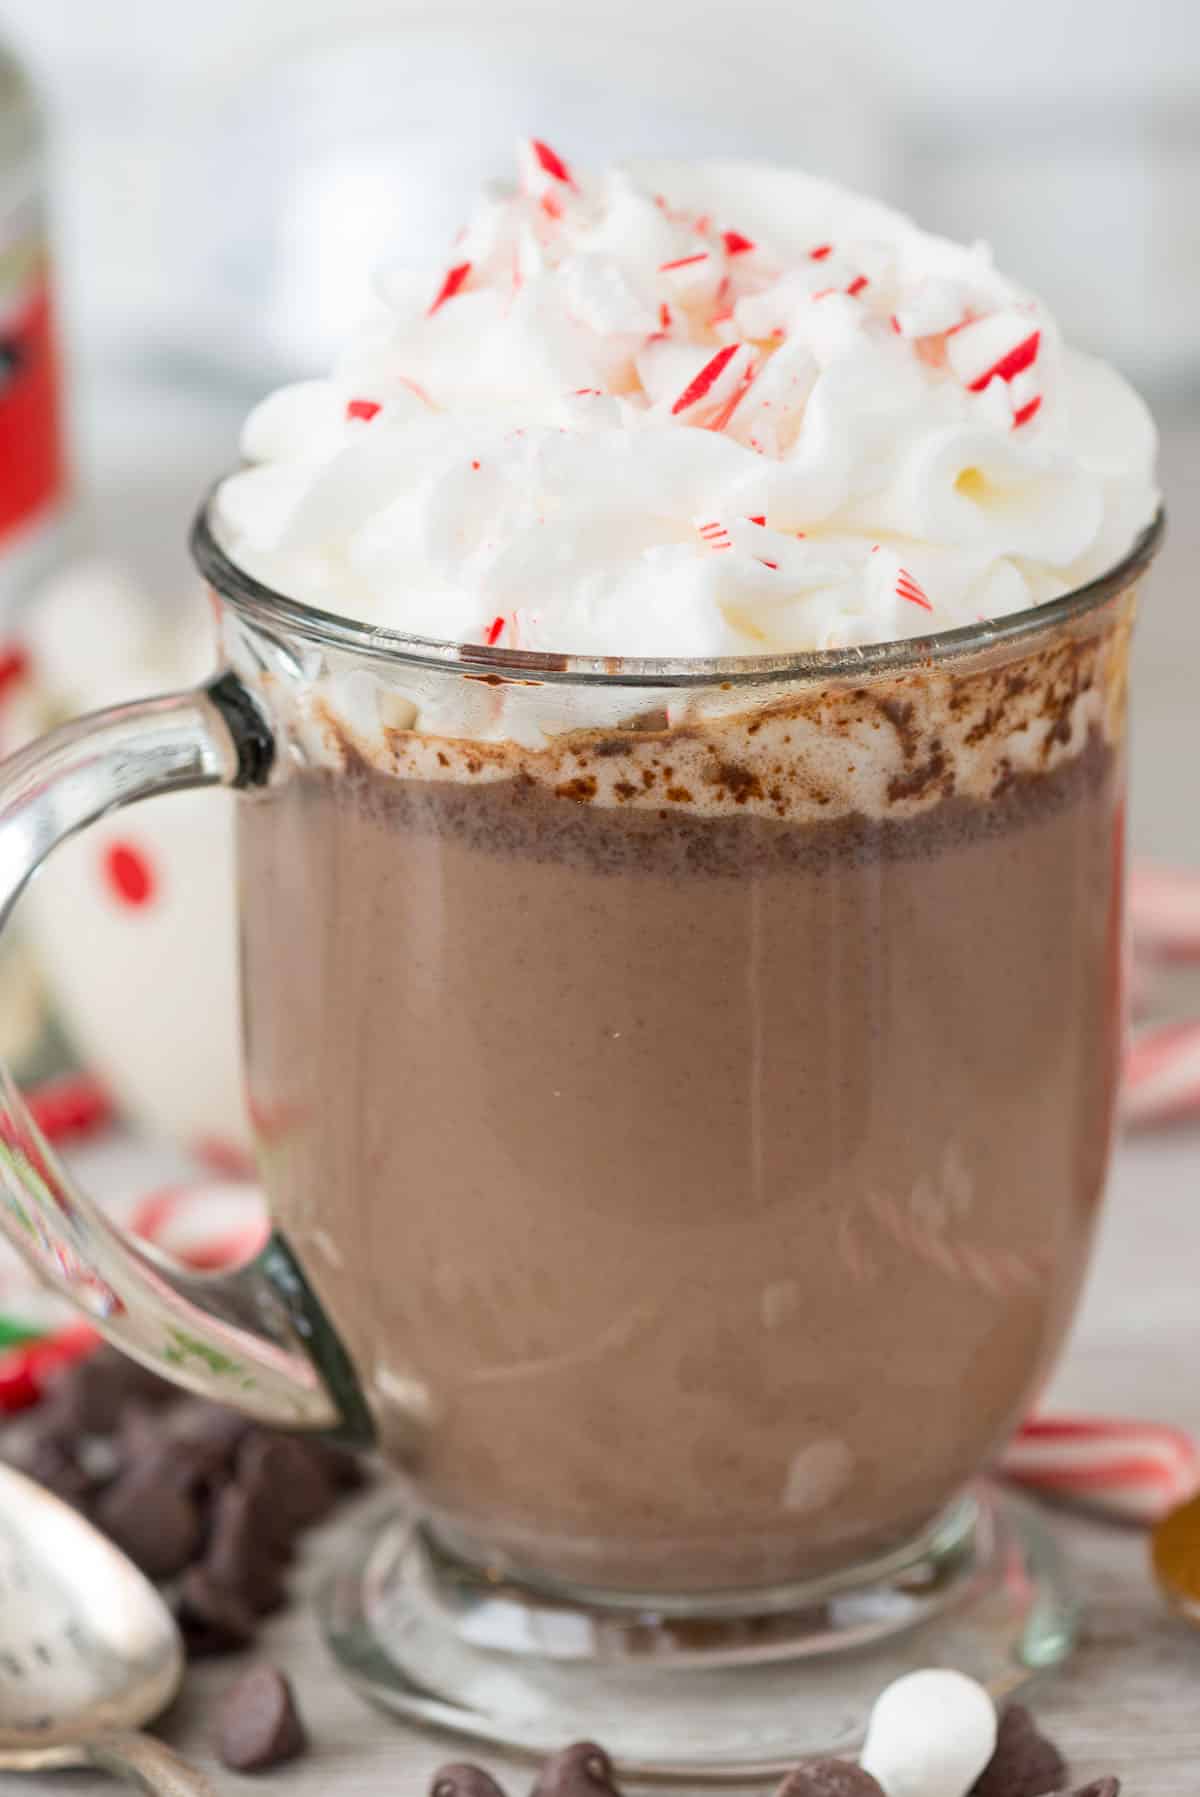 chocolate milk in a clear glass with whipped cream on top